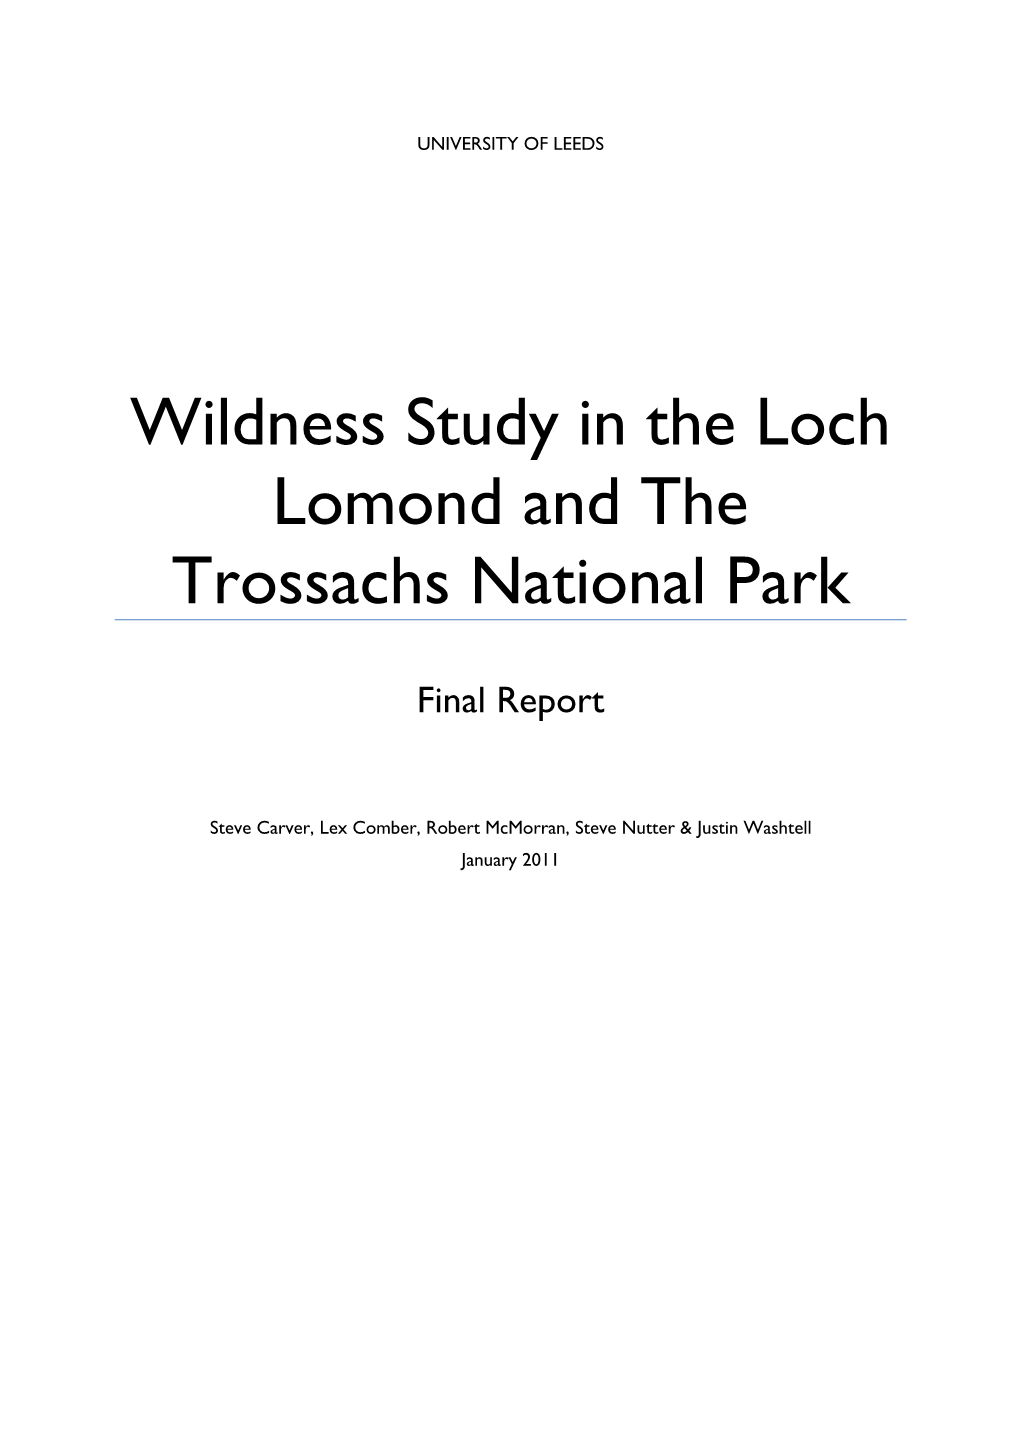 Wildness Study in the Loch Lomond and Trossachs National Park